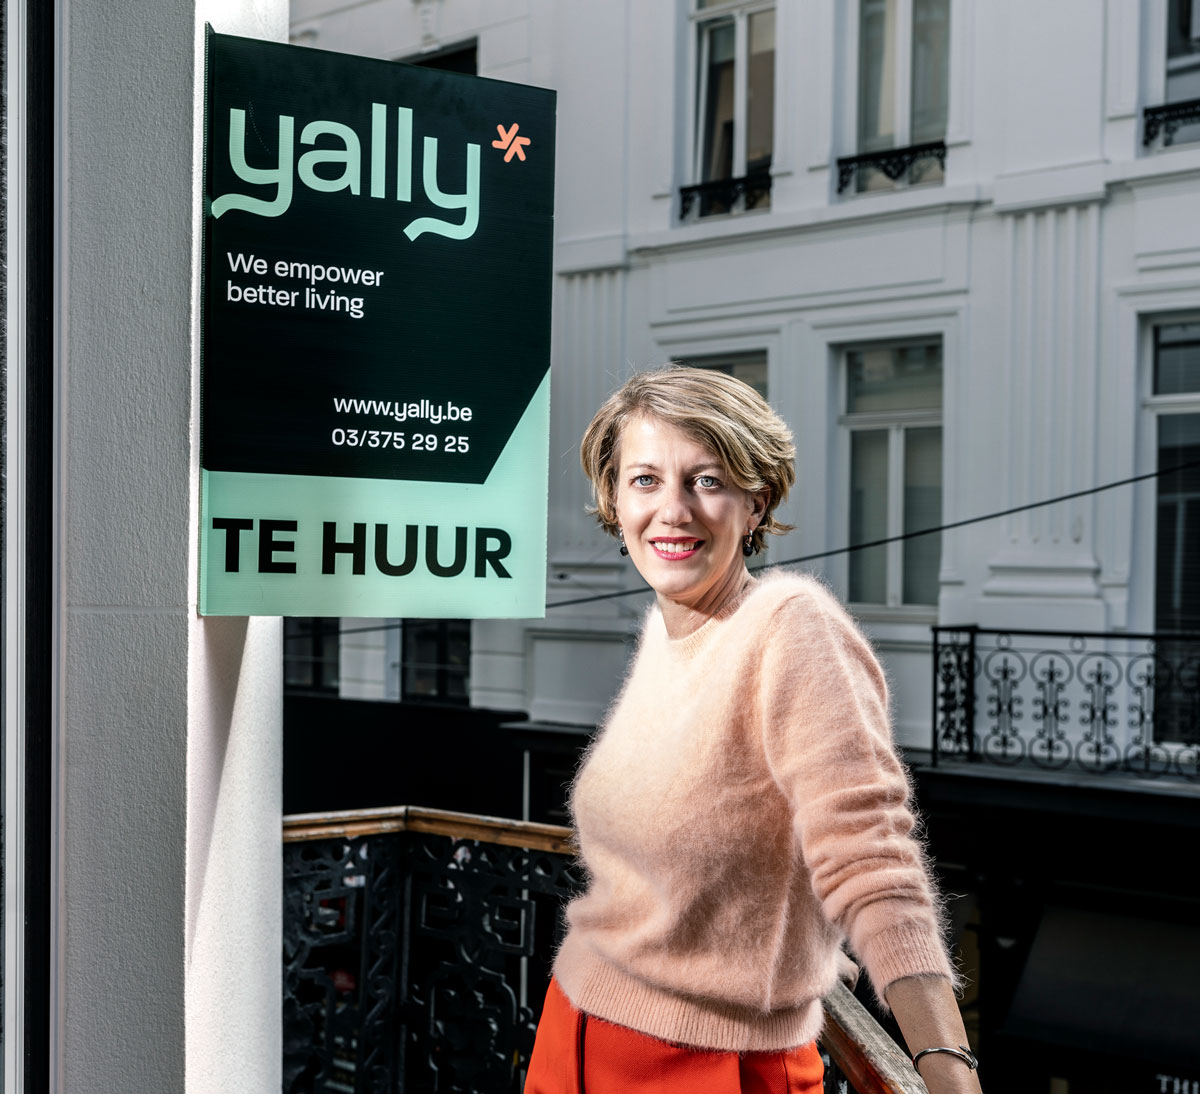 Yally is committed to reducing the total housing costs for tenants by upgrading existing real estate